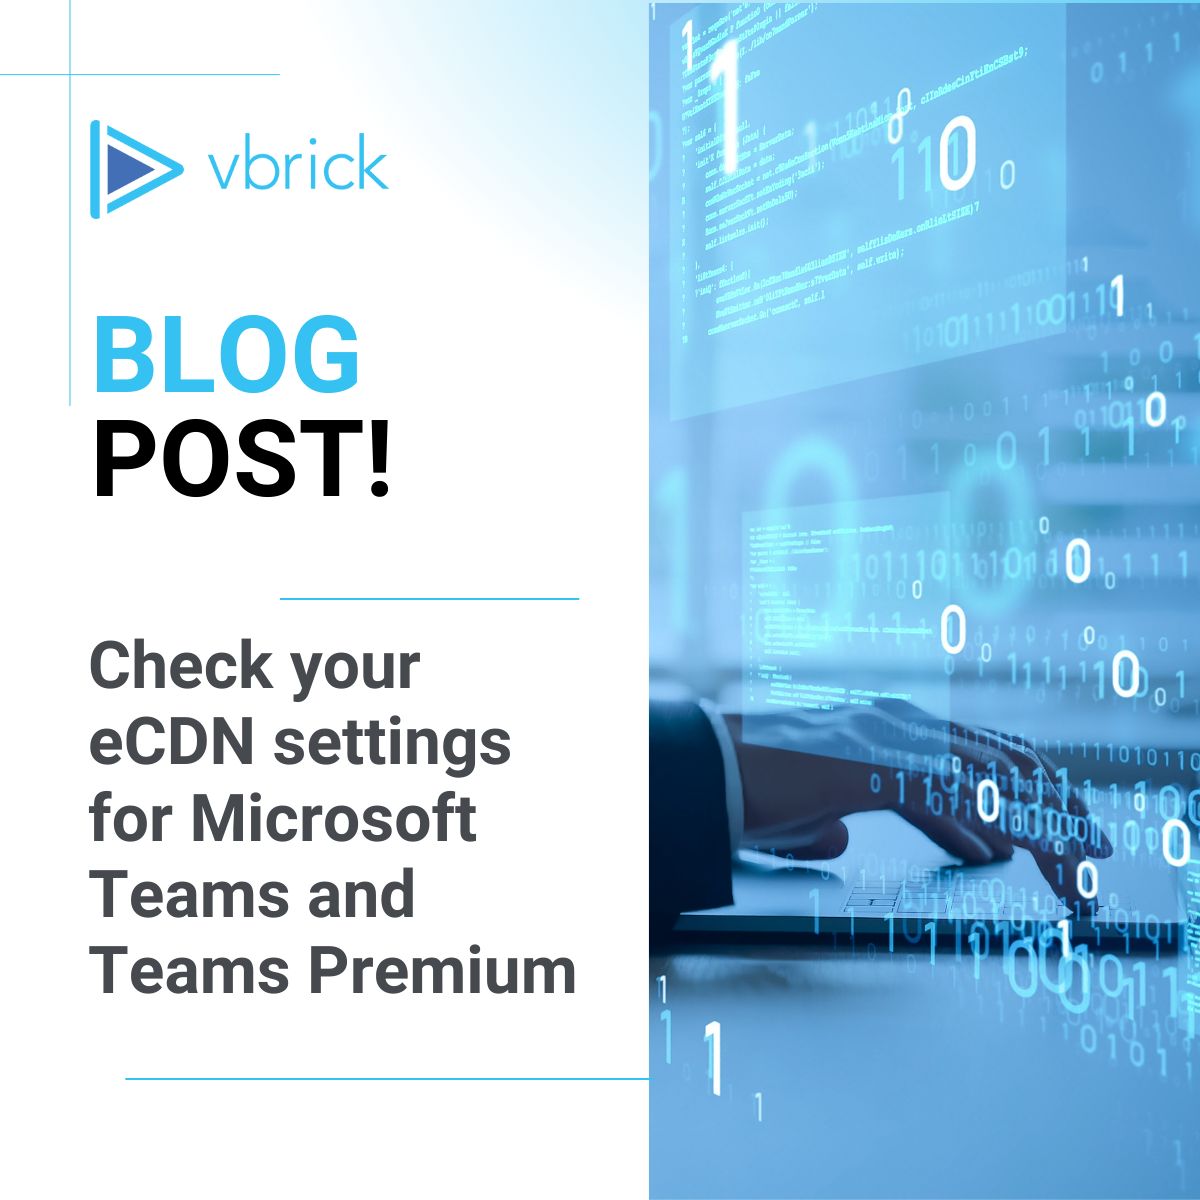 Uncover the steps to revert to Microsoft Teams Premium in Vbrick Universal eCDN settings on our latest blog post! Learn more buff.ly/3UwL4f7